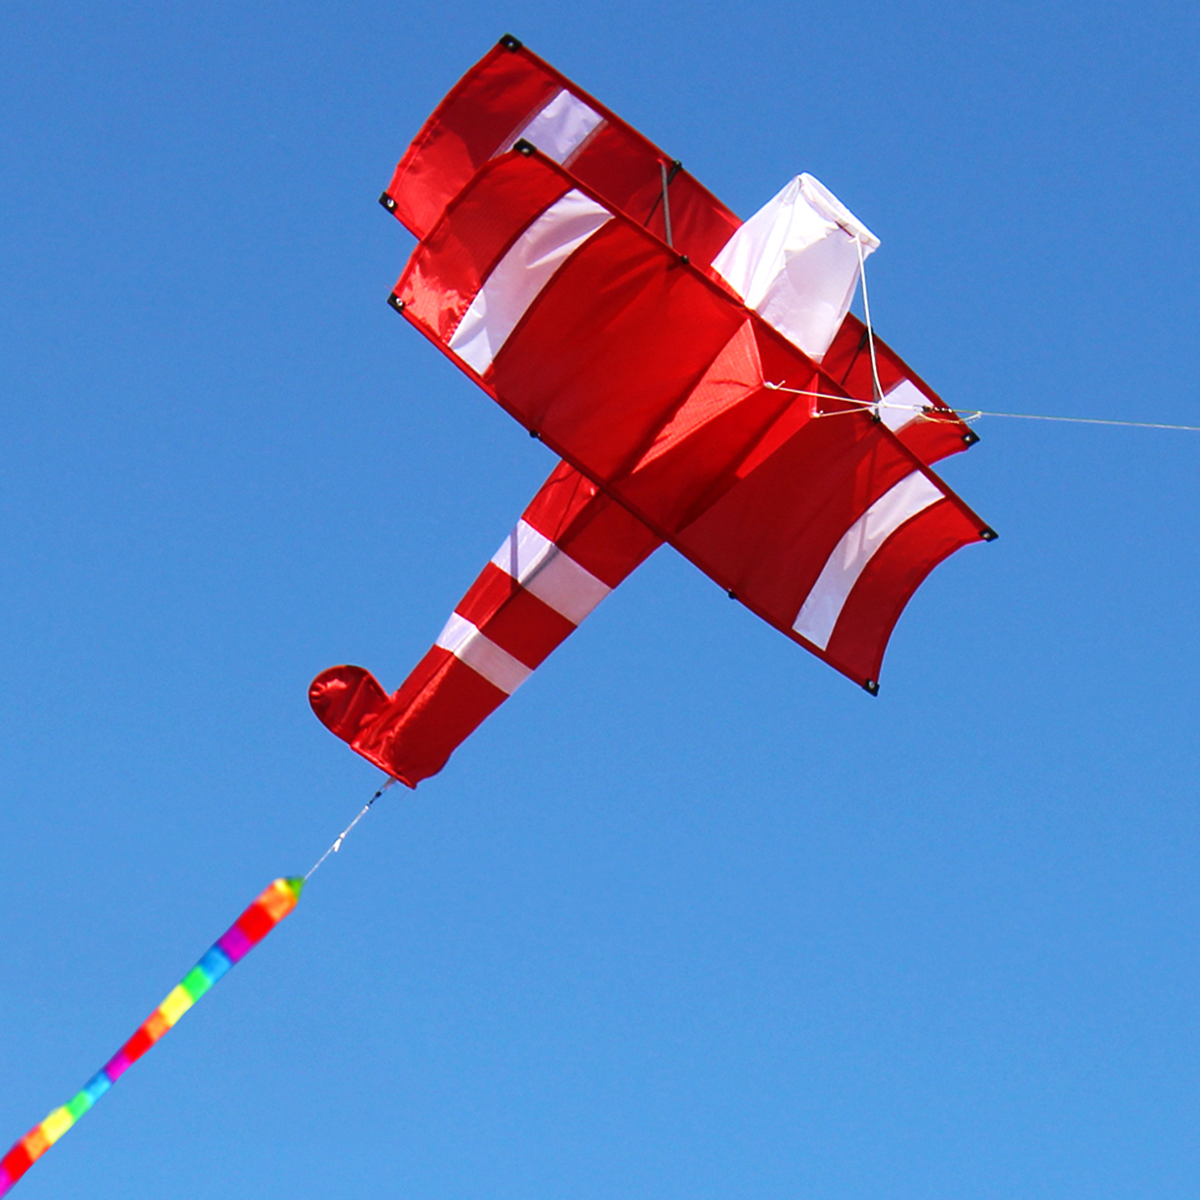 Colorful-3D-Aircraft-Kite-With-Handle-and-Line-Good-Flying-Gift-1610431-2